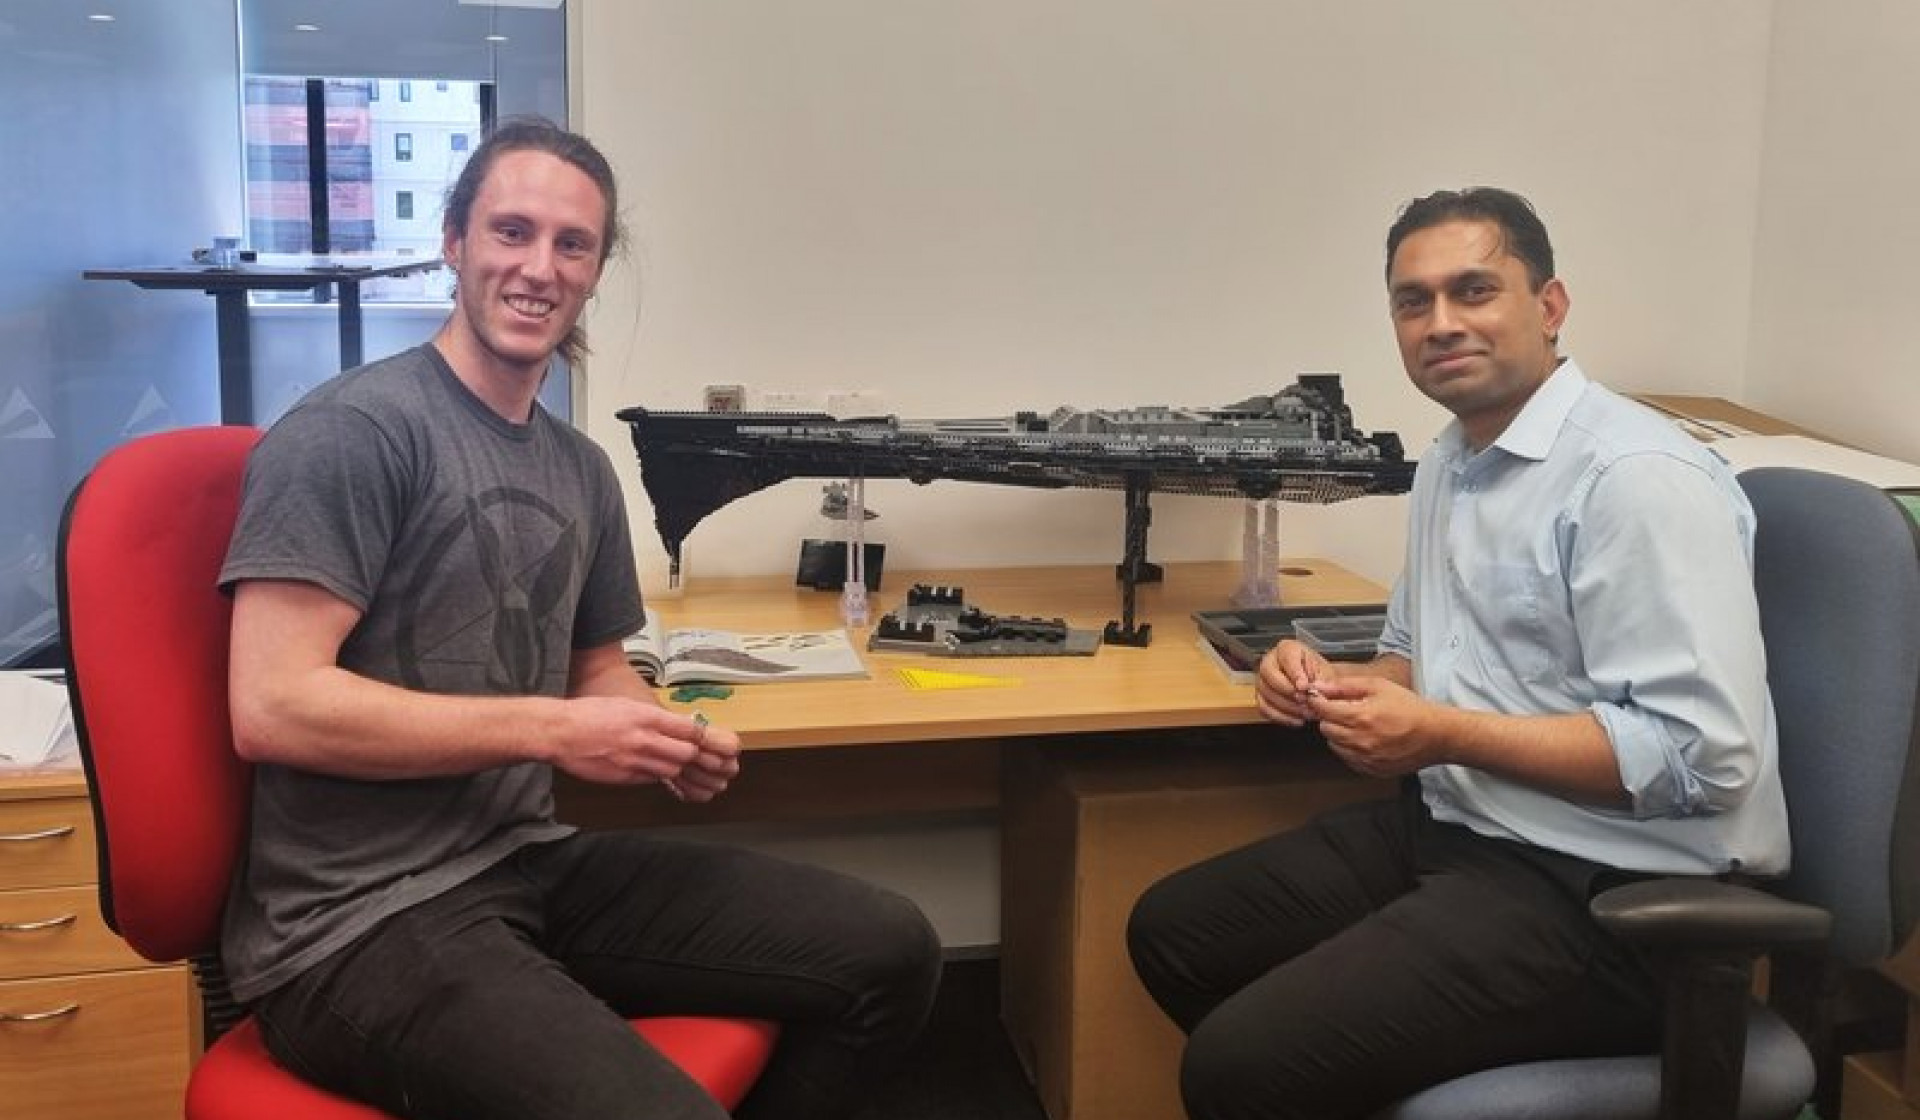 Liam Sharpe and Sanjay DSouza smiling are sitting on chairs in a brightly lit office with a large unfinished Star Wars Lego set on the table behind them.